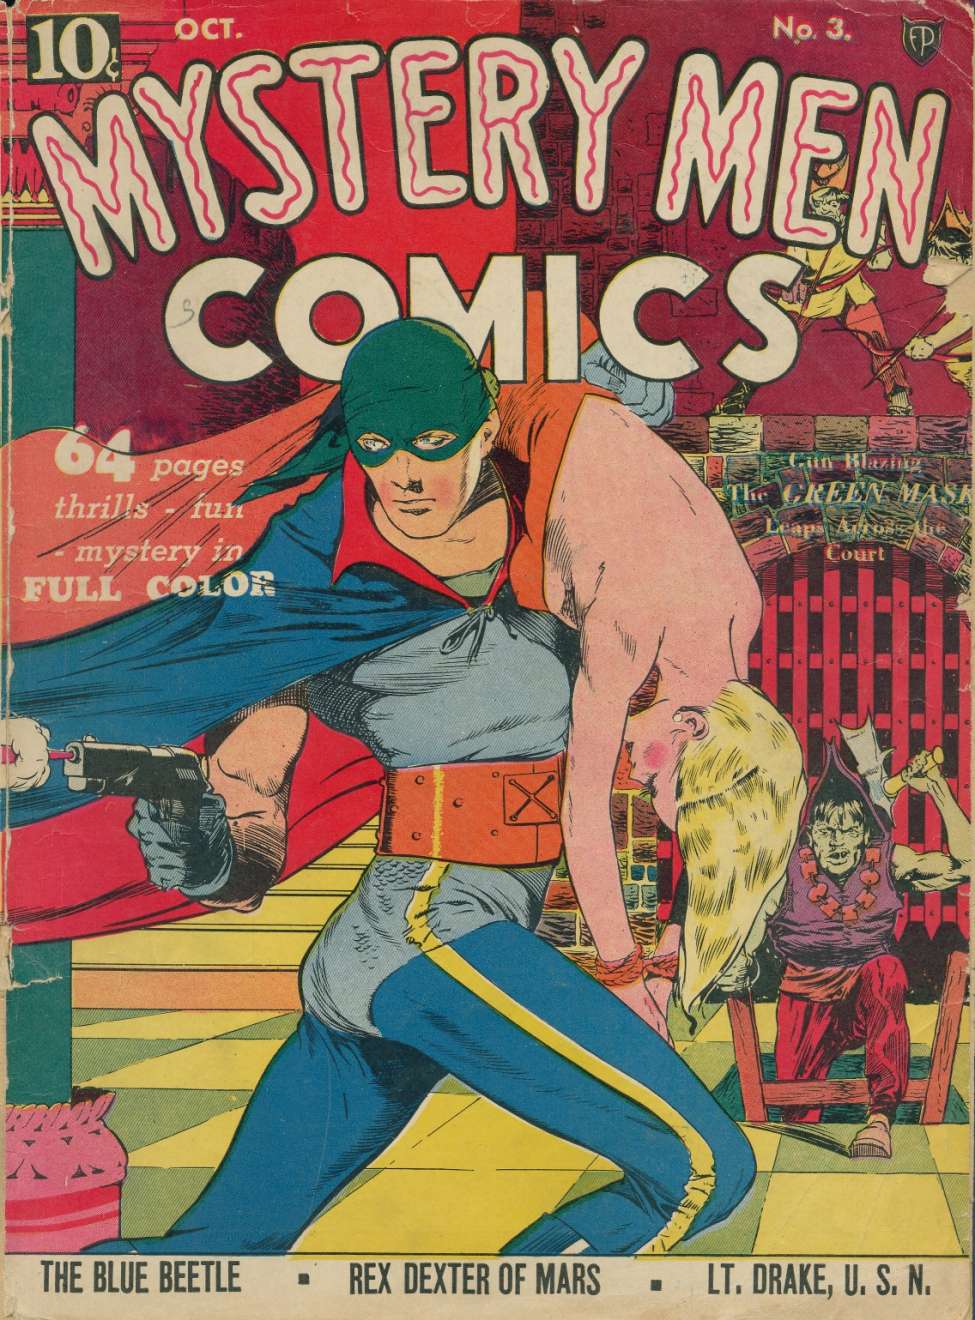 Mystery Men Comics #3 by Fox Features